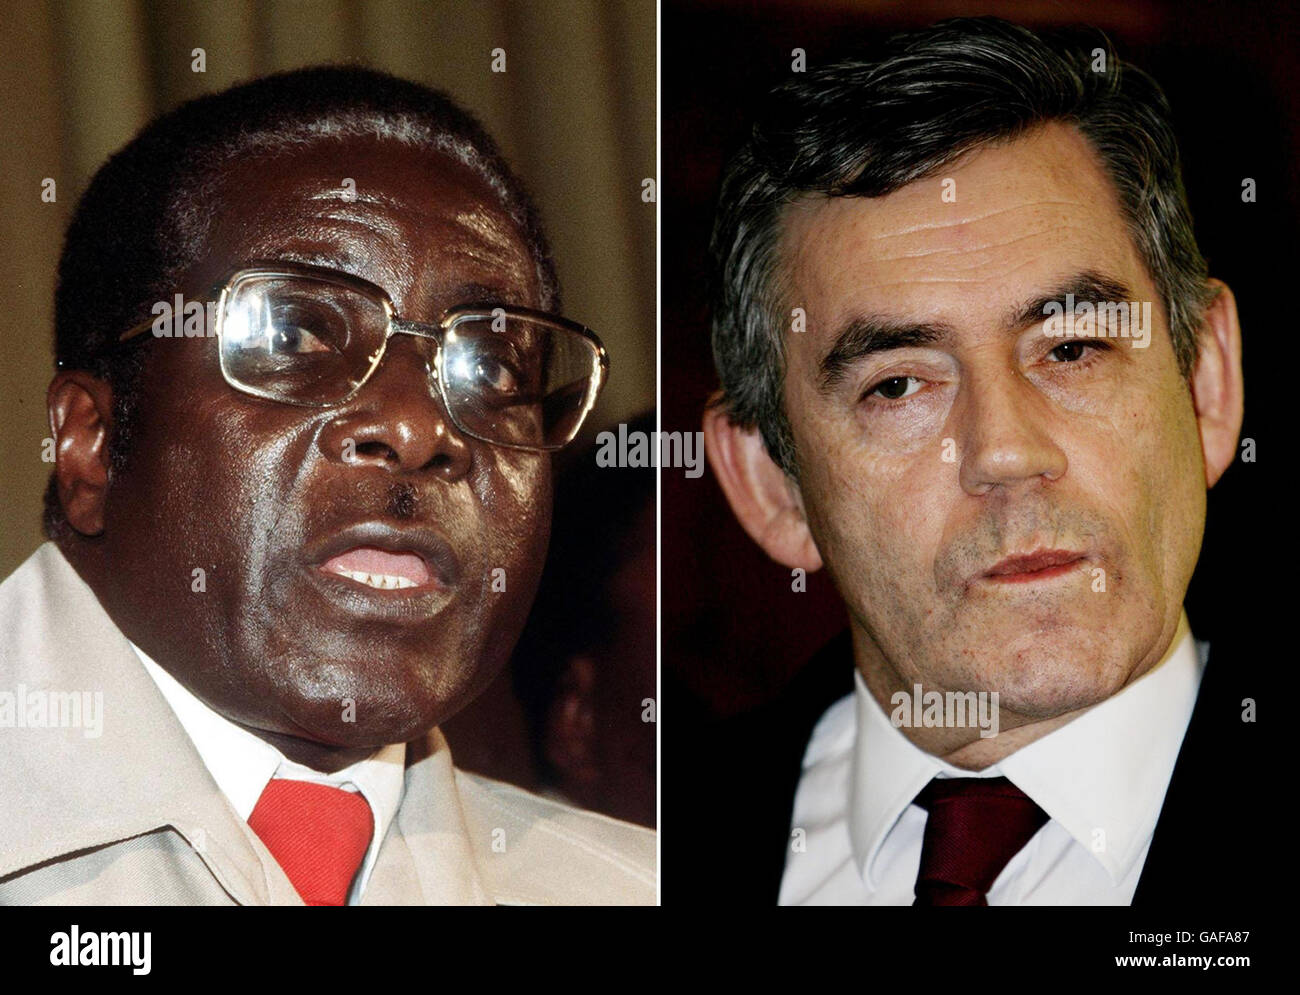 File photos of (left to right) Robert Mugabe and Gordon Brown. Leaders from the European Union and Africa will begin gathering today in Lisbon - without Gordon Brown. The Prime Minister is boycotting the EU-Africa summit in the Portuguese capital because Zimbabwe's President Robert Mugabe is attending. Stock Photo